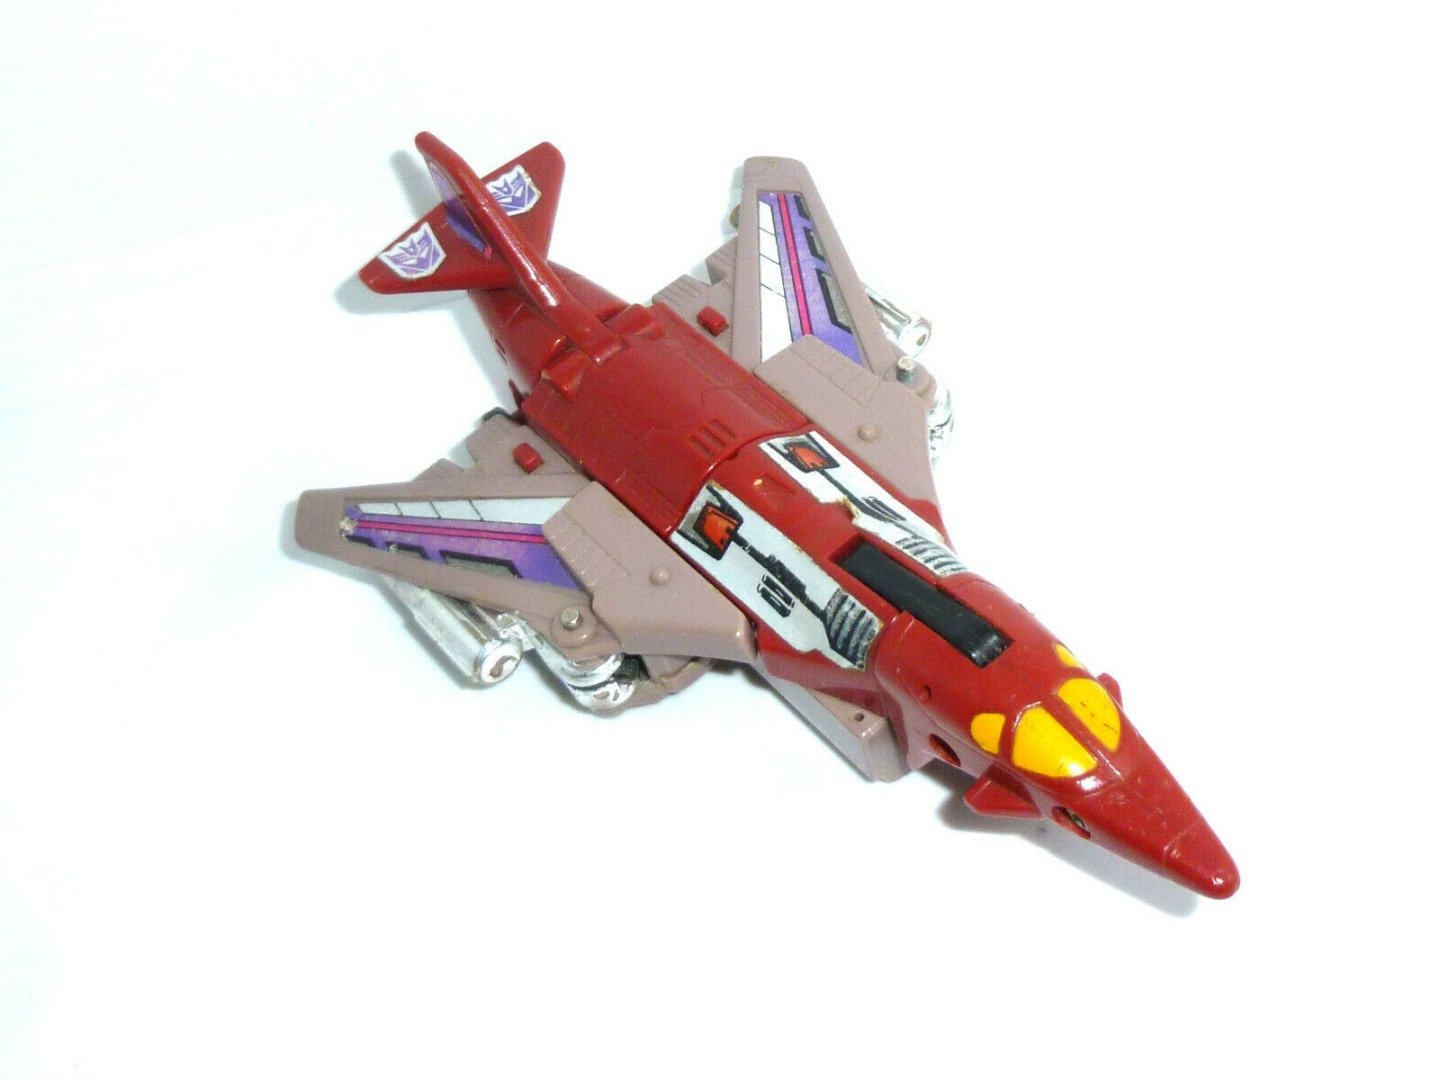 Transformers - Windsweeper - Kampfjet - Hasbro 1988 G1 Triggerbots and Triggercons 4